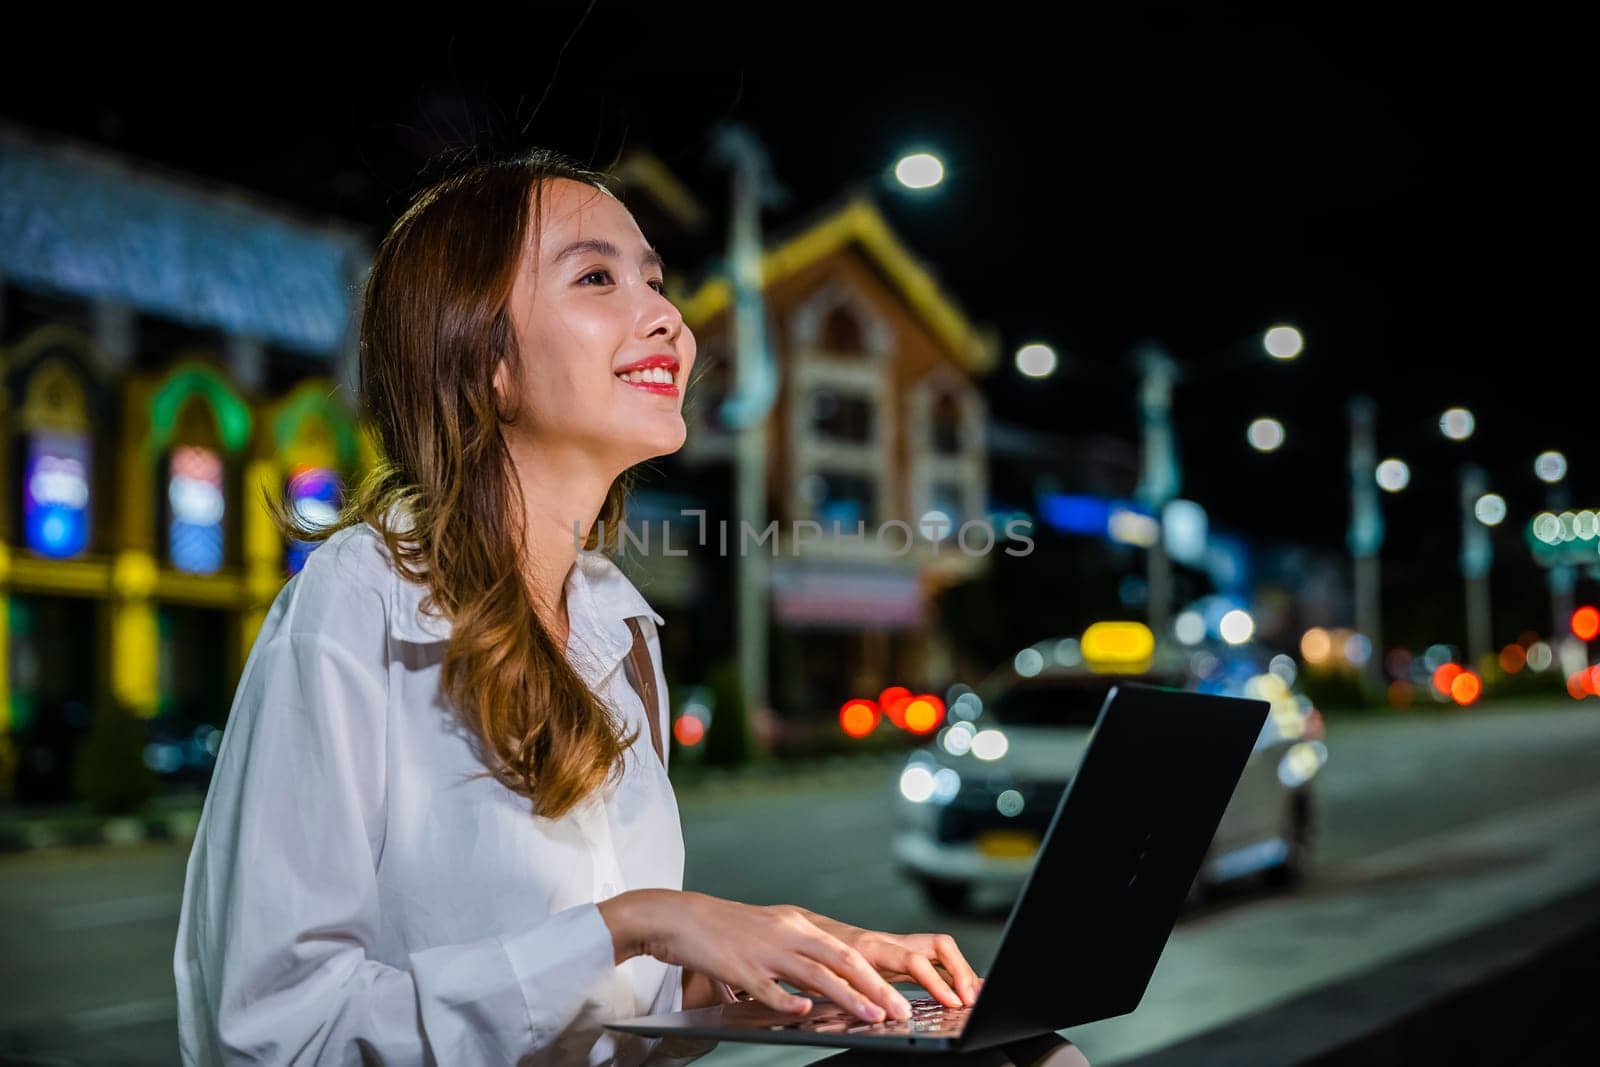 As the city lights up the night sky, a woman is hard at work on her laptop computer by Sorapop